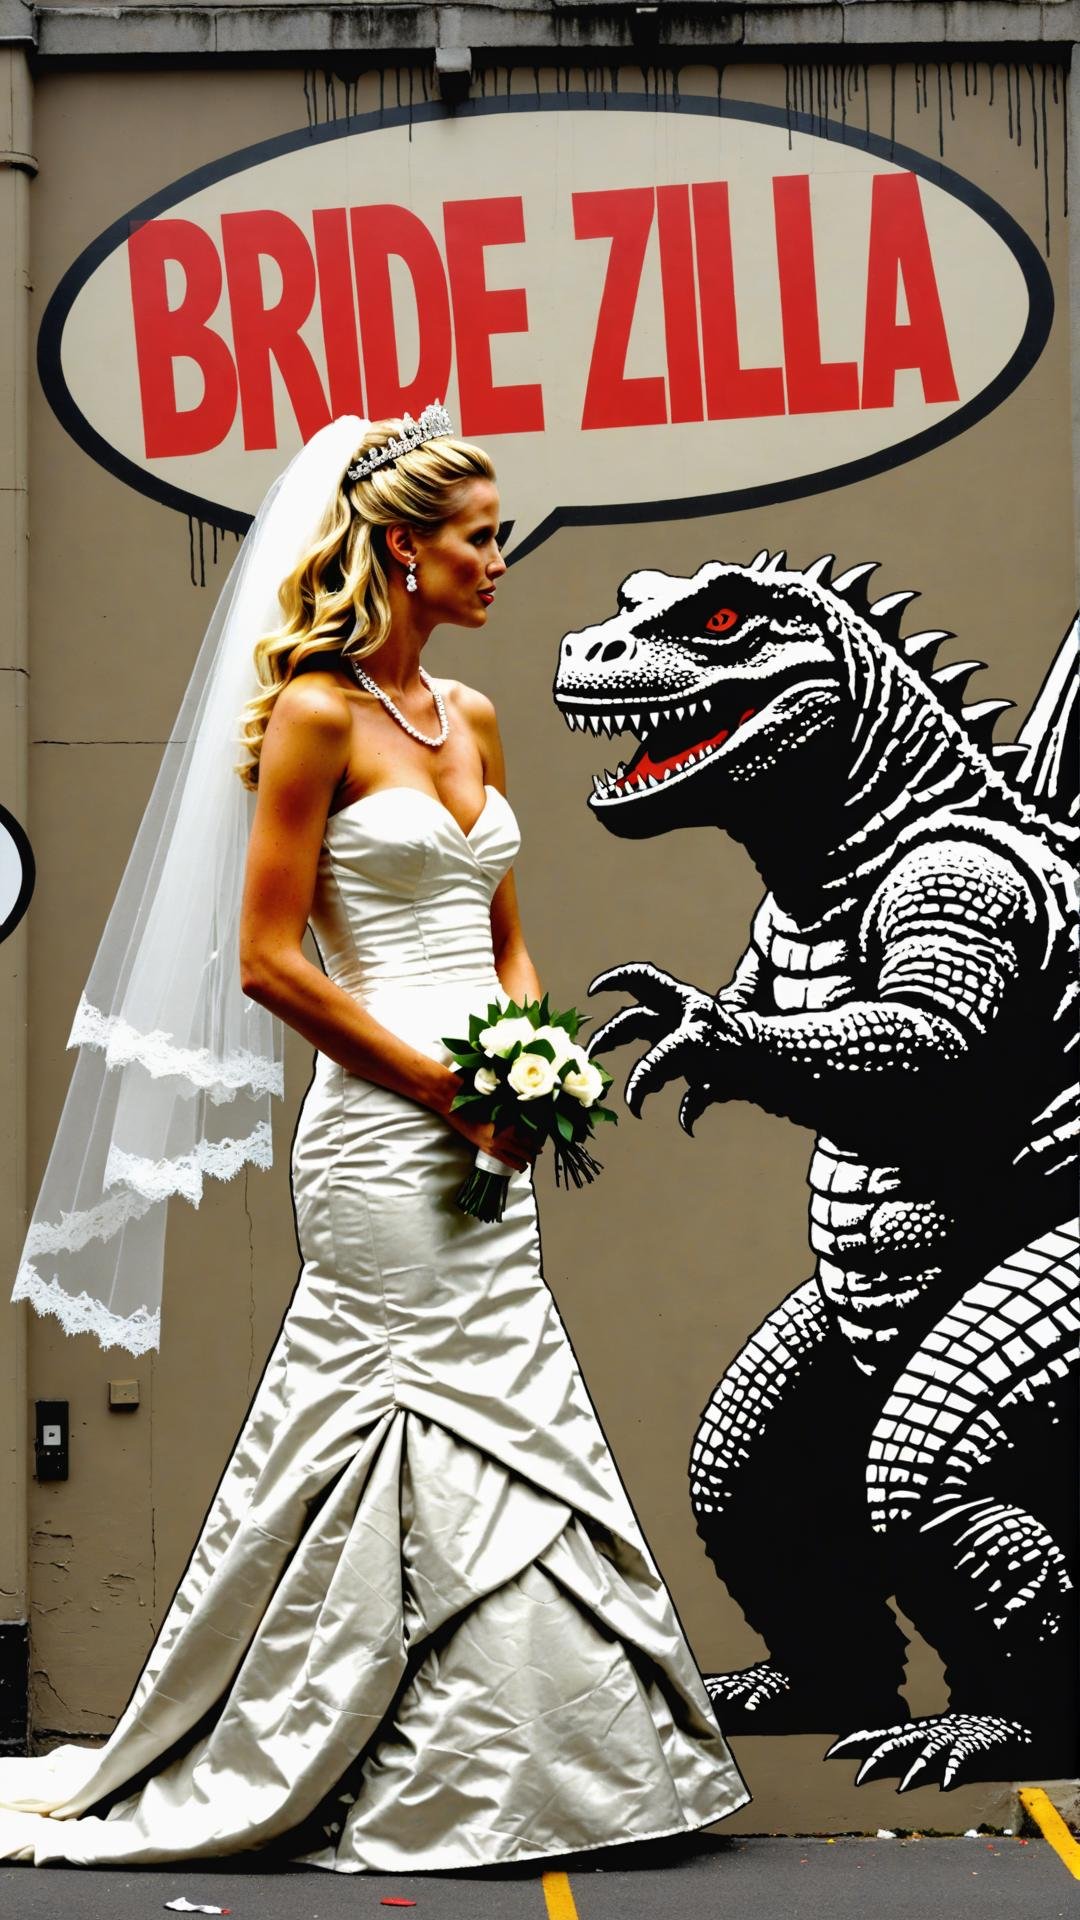 Banksy graffiti of blonde supermodel bride zilla and Godzilla getting married with text bubble that says "bride zilla"